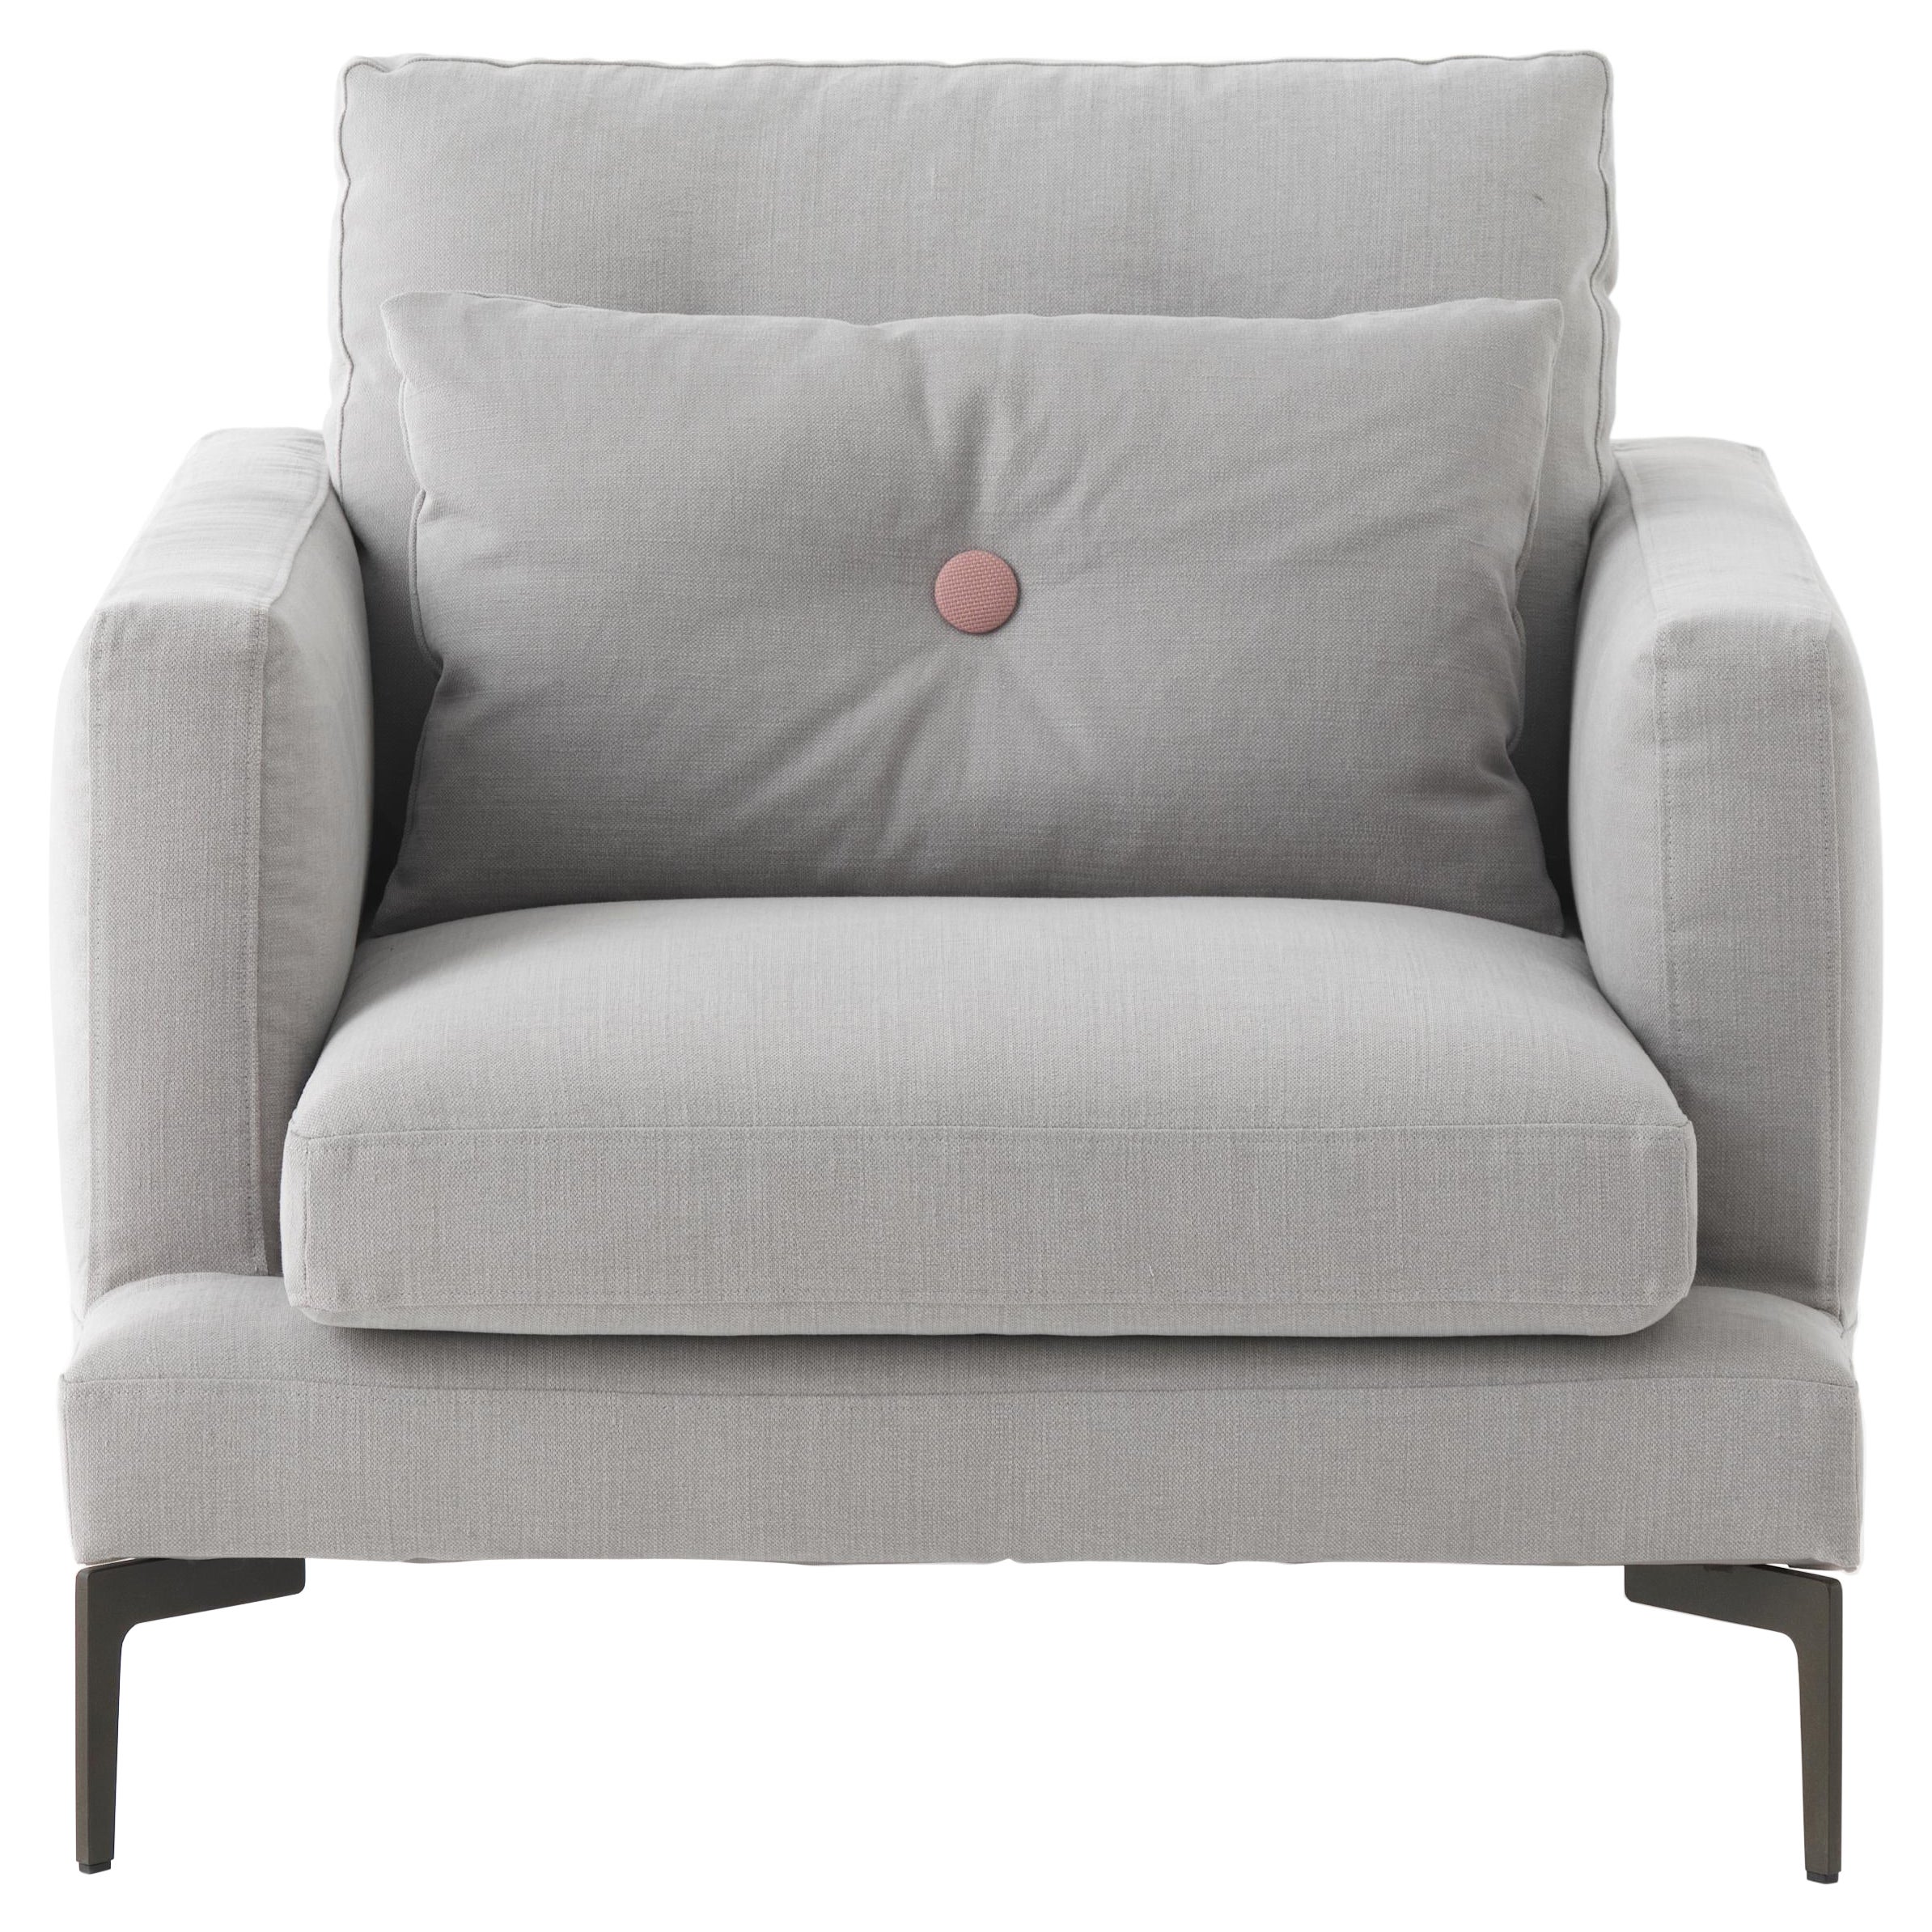 Essentiel Small Armchair with Cushion in Creta Grey Upholstery by Sergio Bicego For Sale